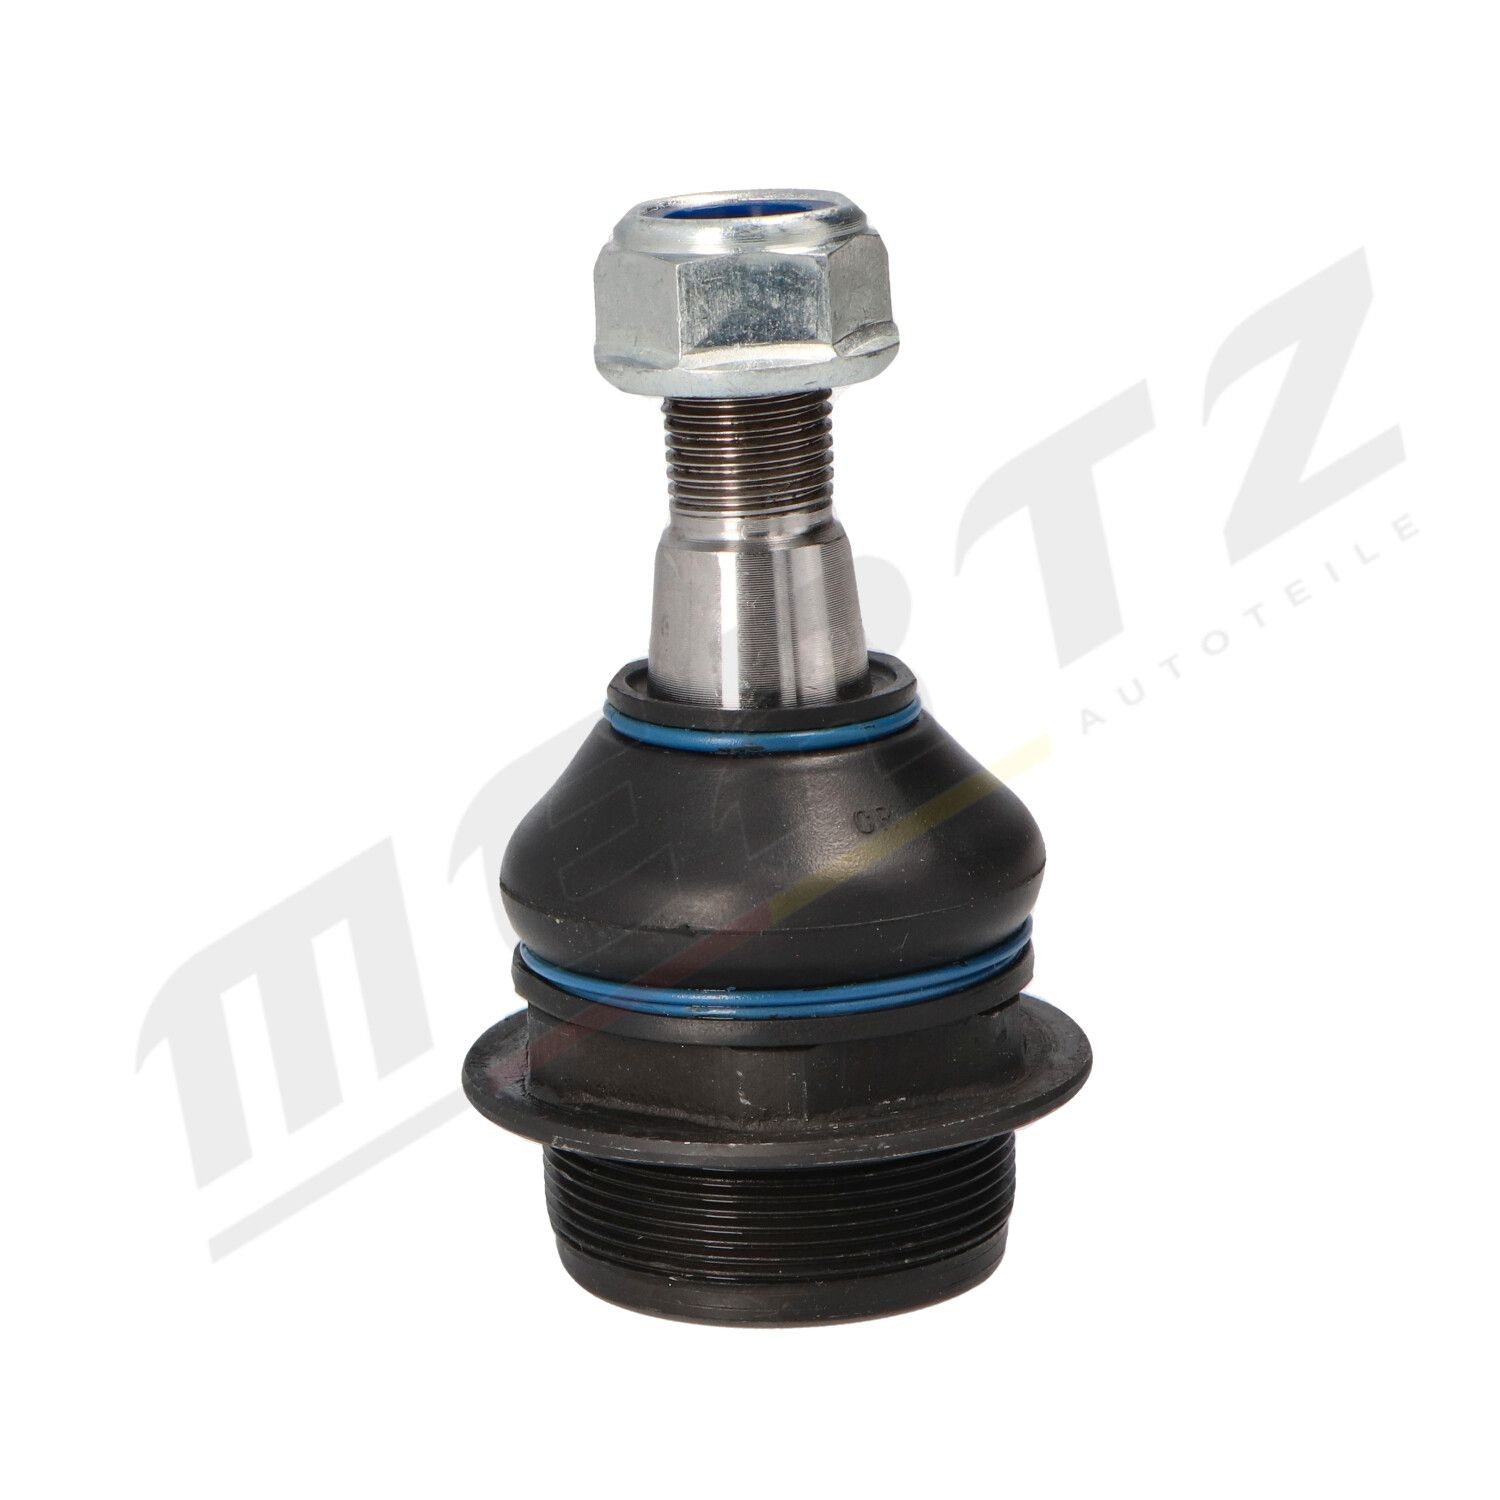 MERTZ Front Axle Left, with nut, 23mm, M16x1,5, M45x1,5 RHTmm Cone Size: 23mm Suspension ball joint M-S2193 buy